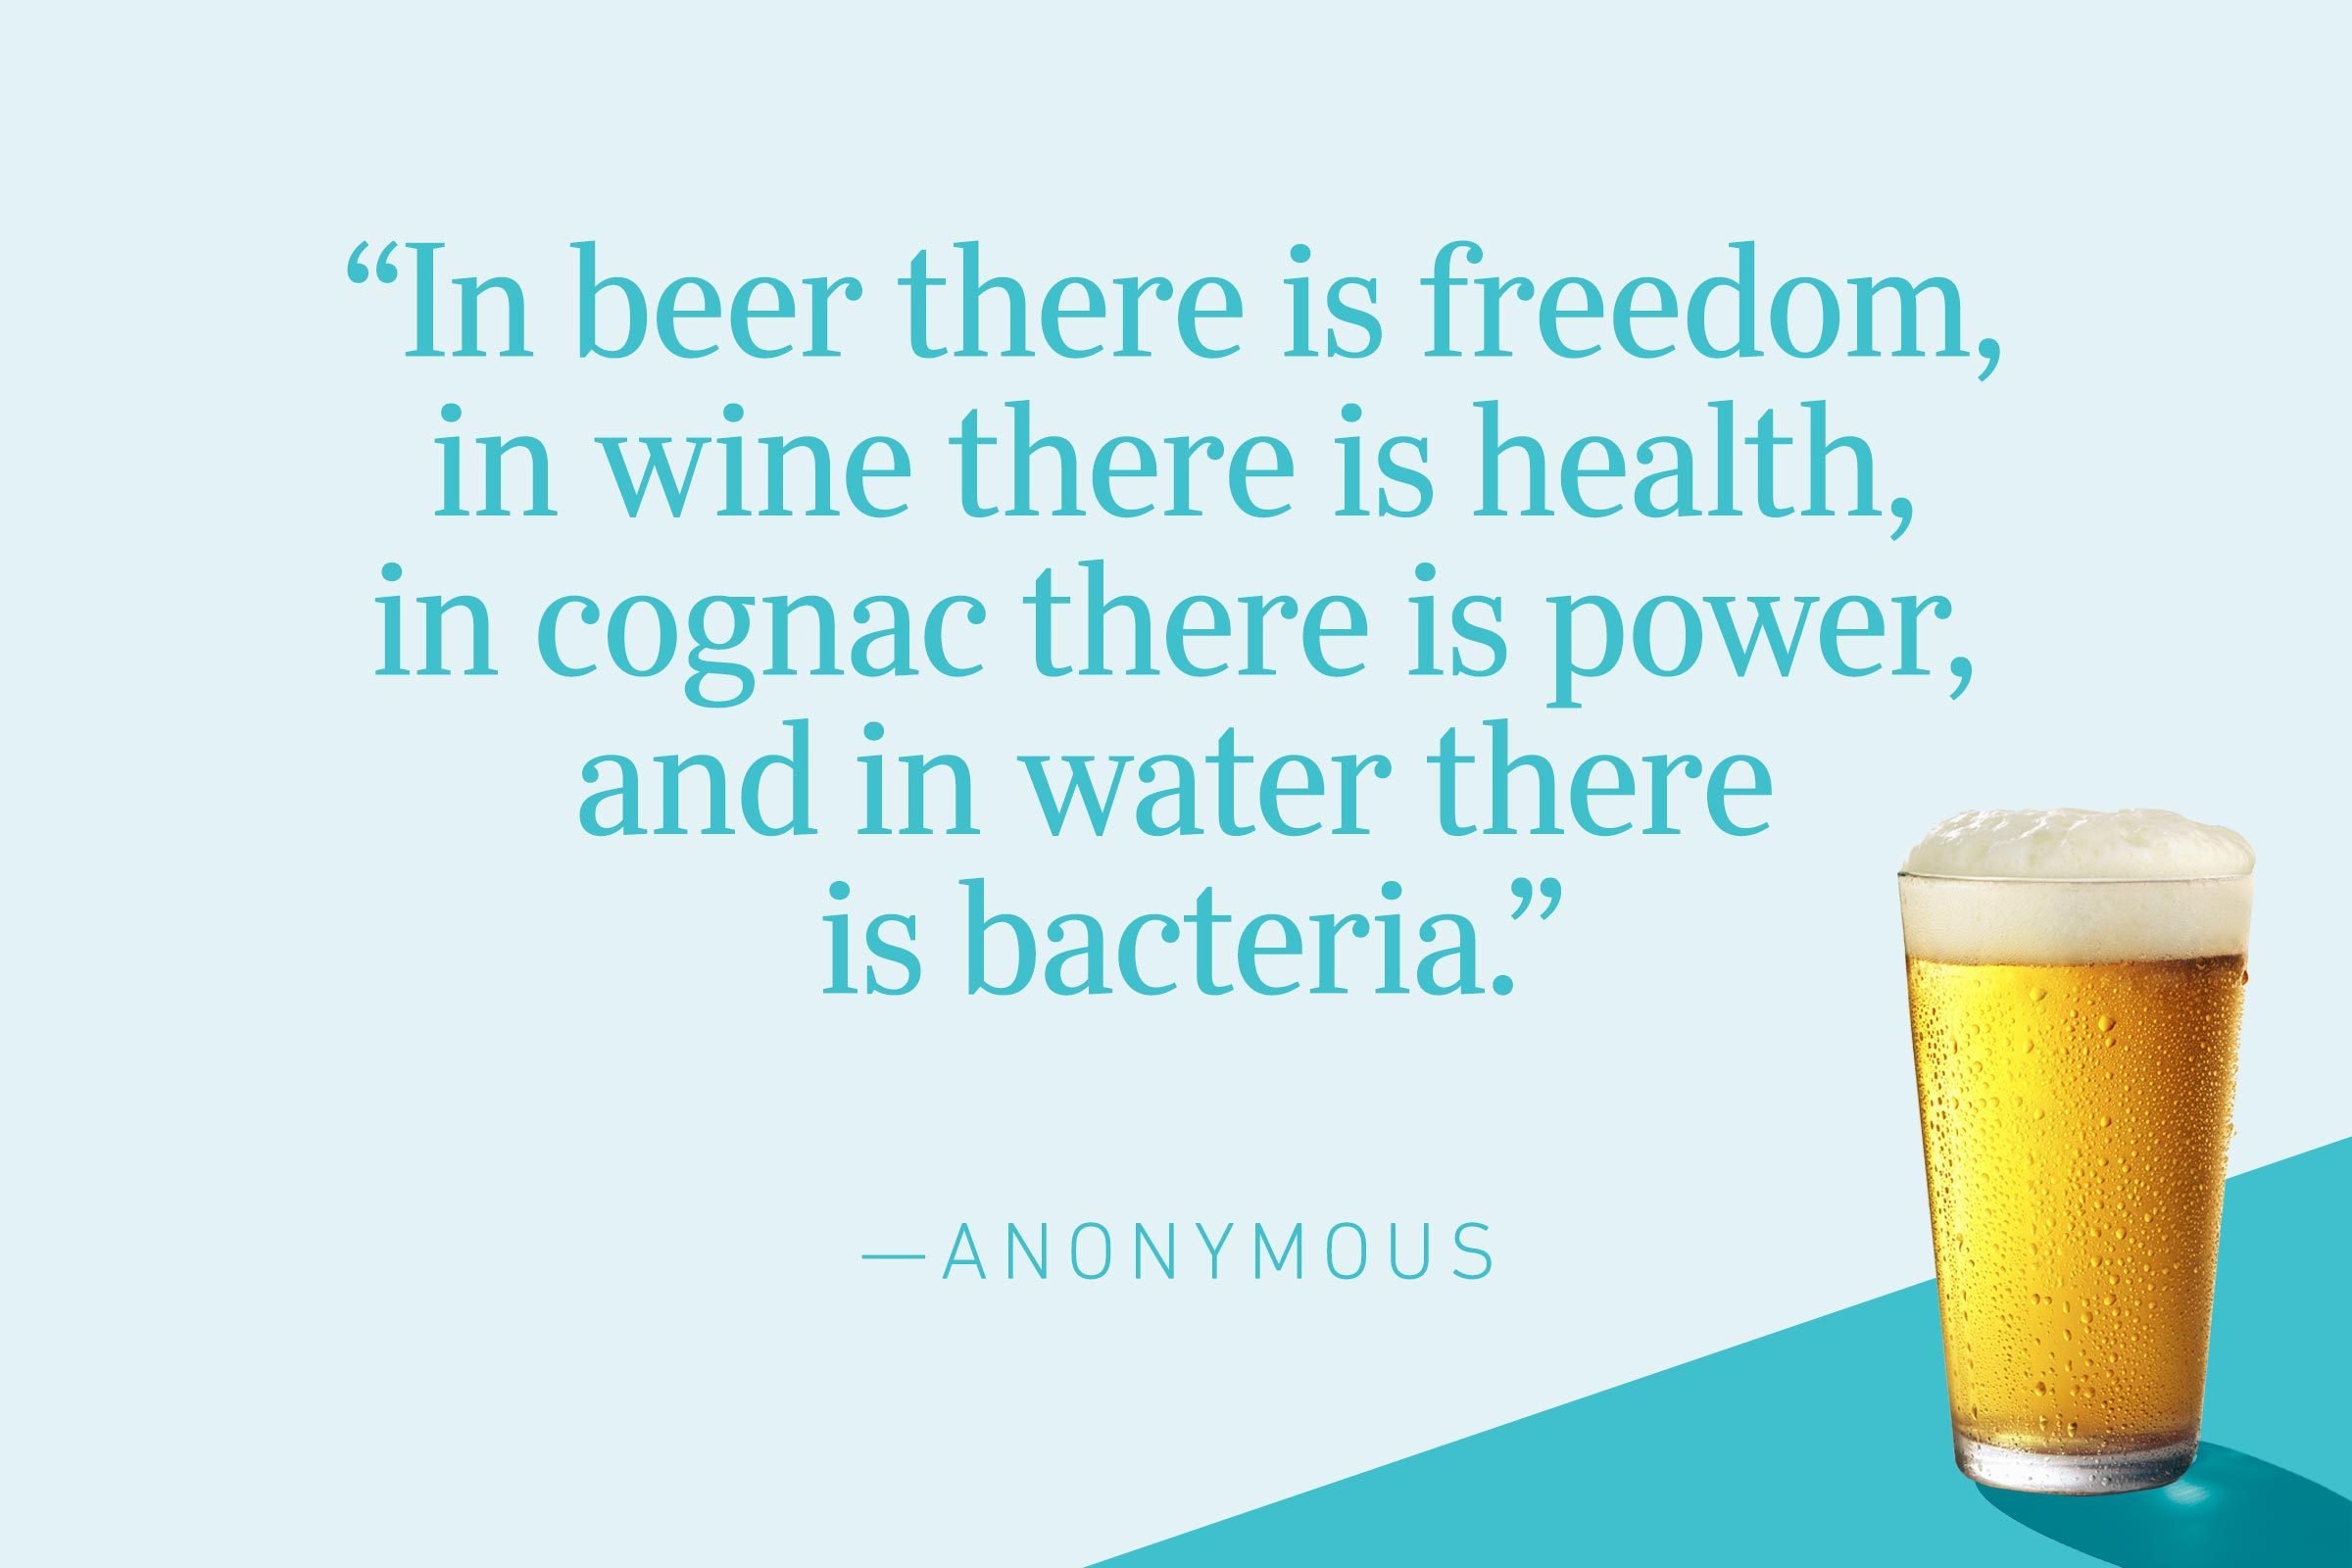 "In beer there is freedom, in wine there is health, in cognac there is power, and in water there is bacteria." —Anonymous